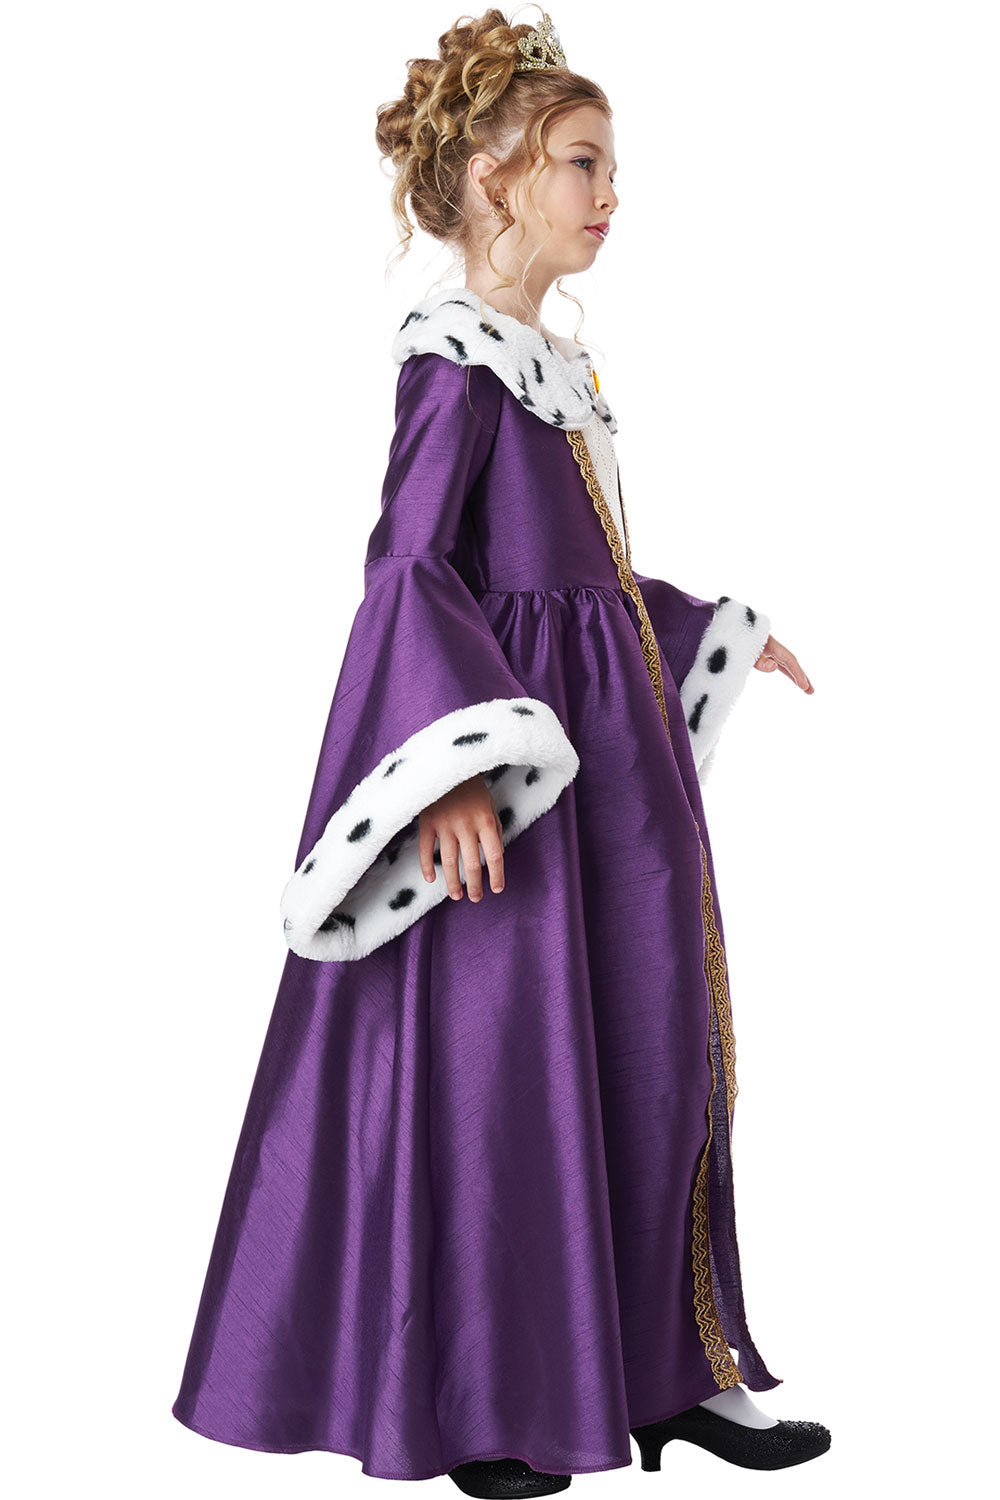 Queen For A Day / Child California Costume 3021-135